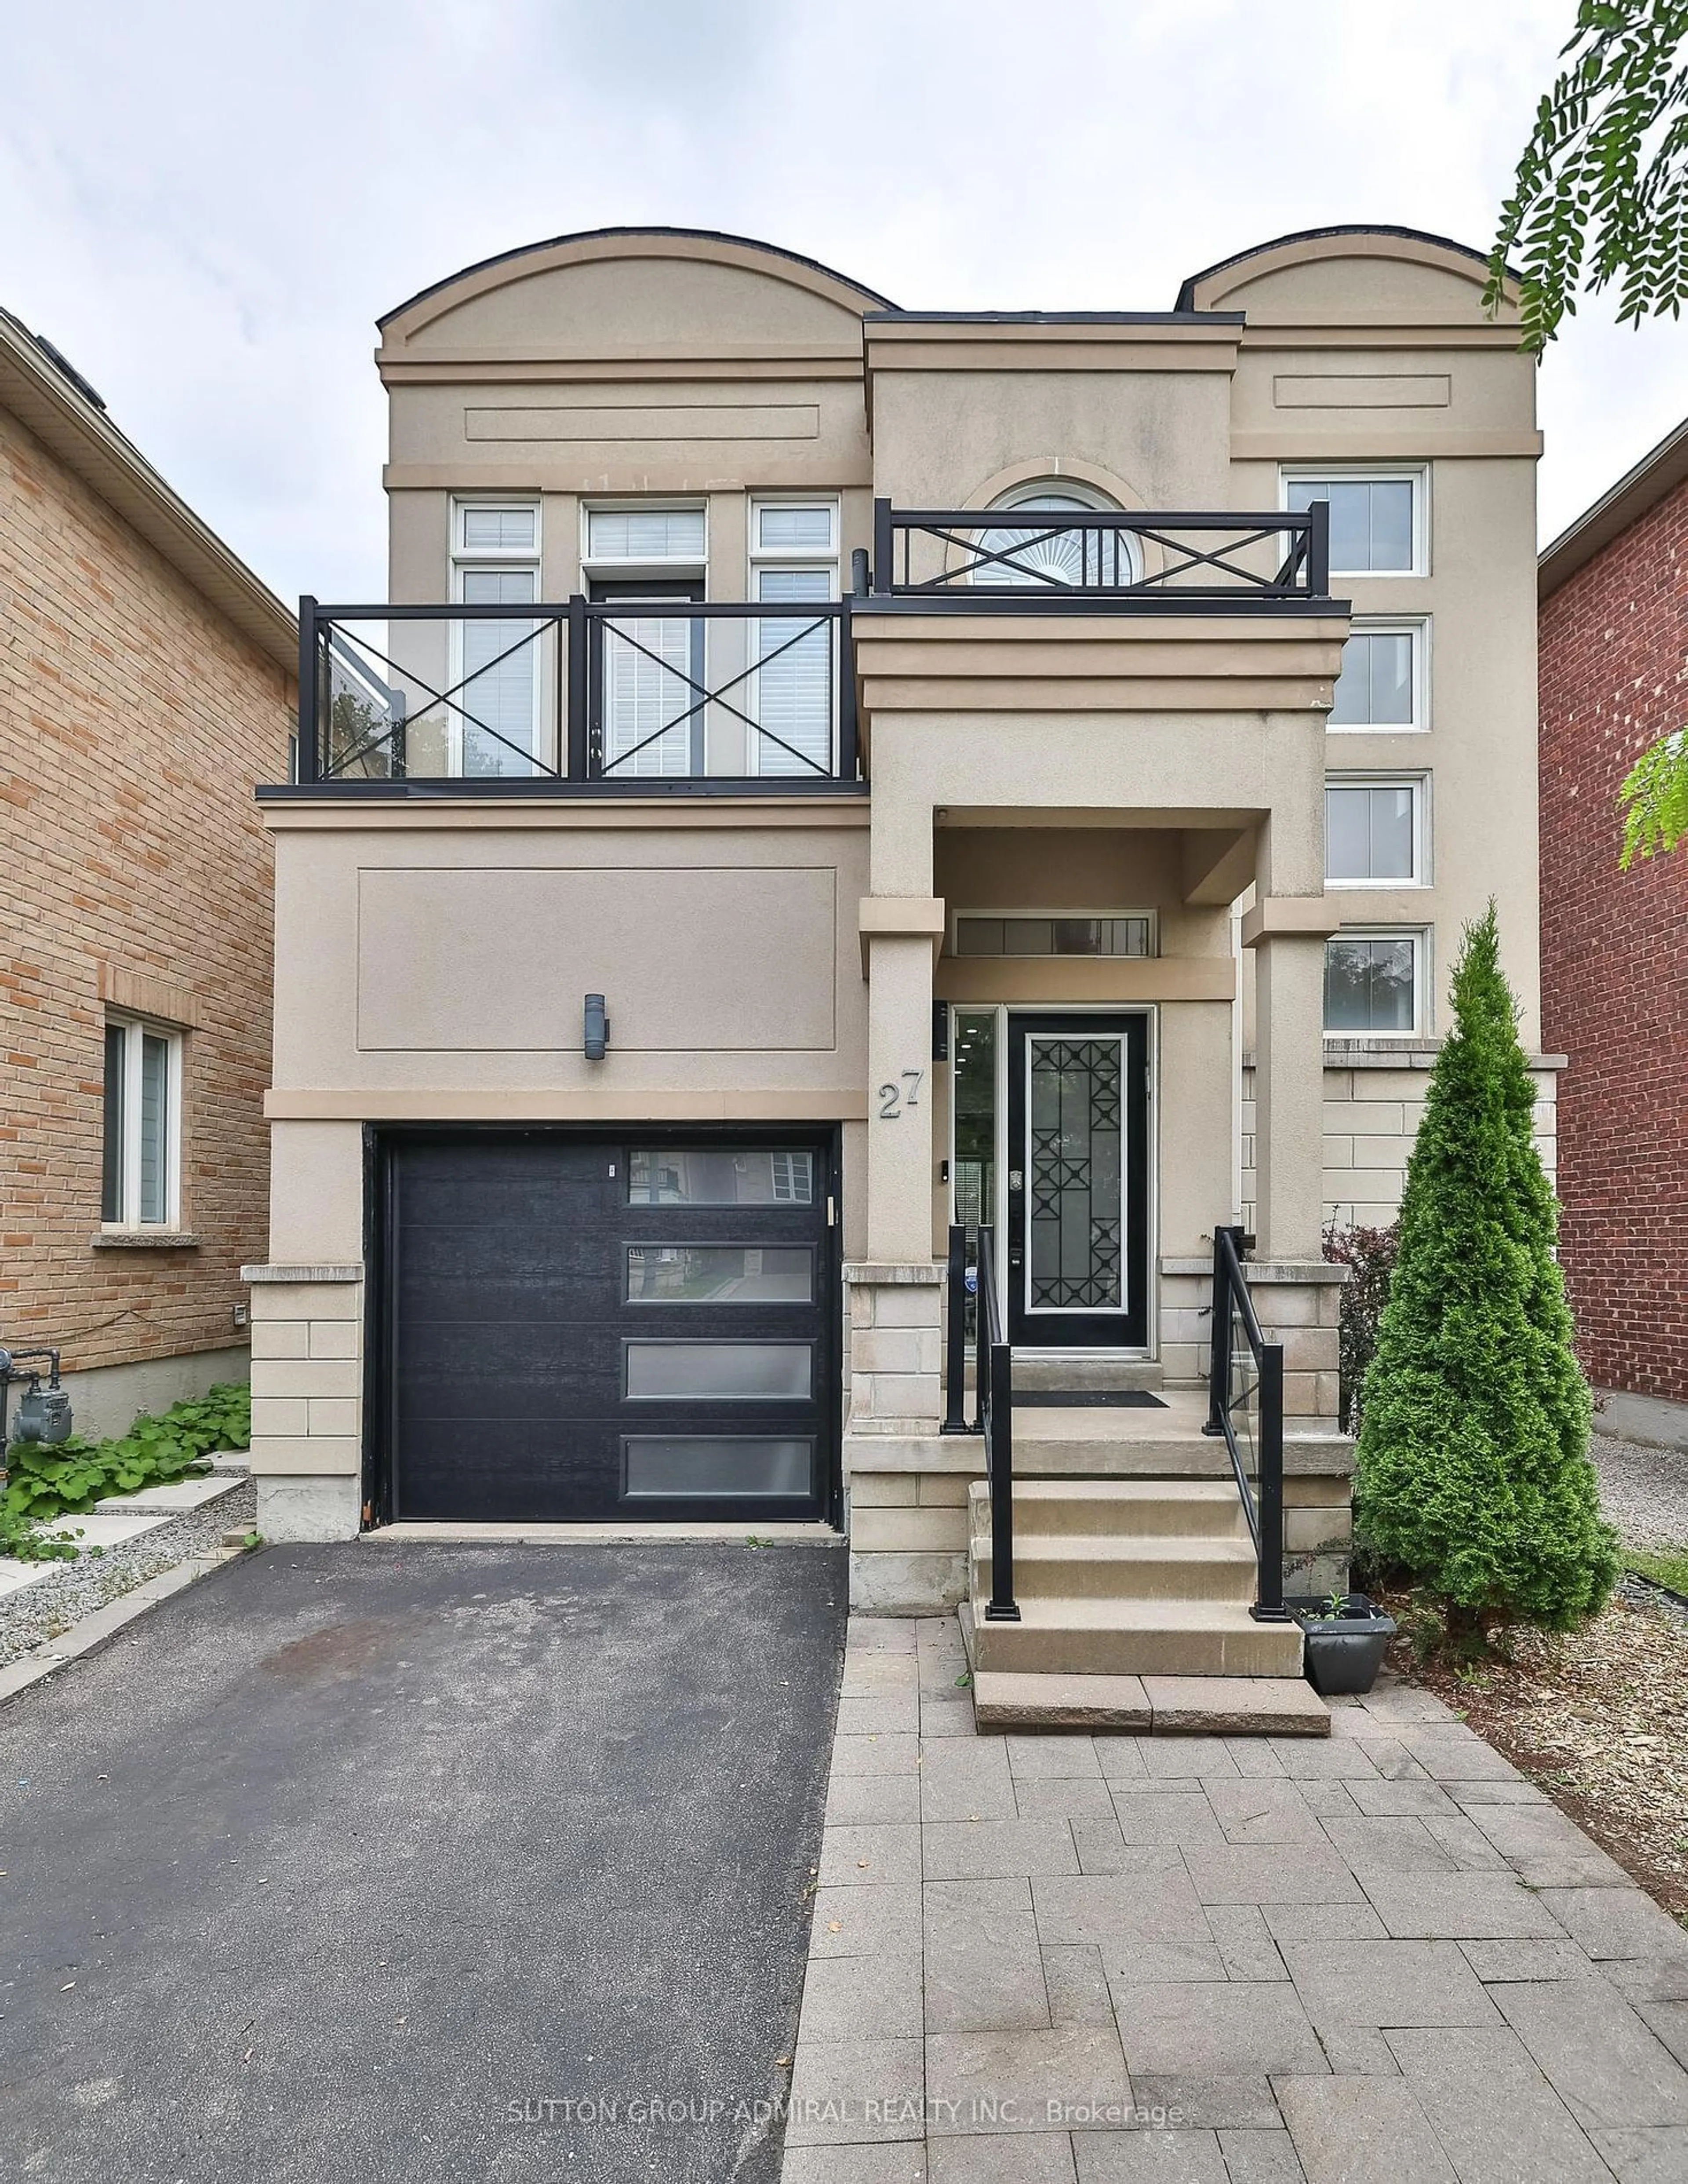 Home with brick exterior material for 27 Asner Ave, Vaughan Ontario L6A 0W6